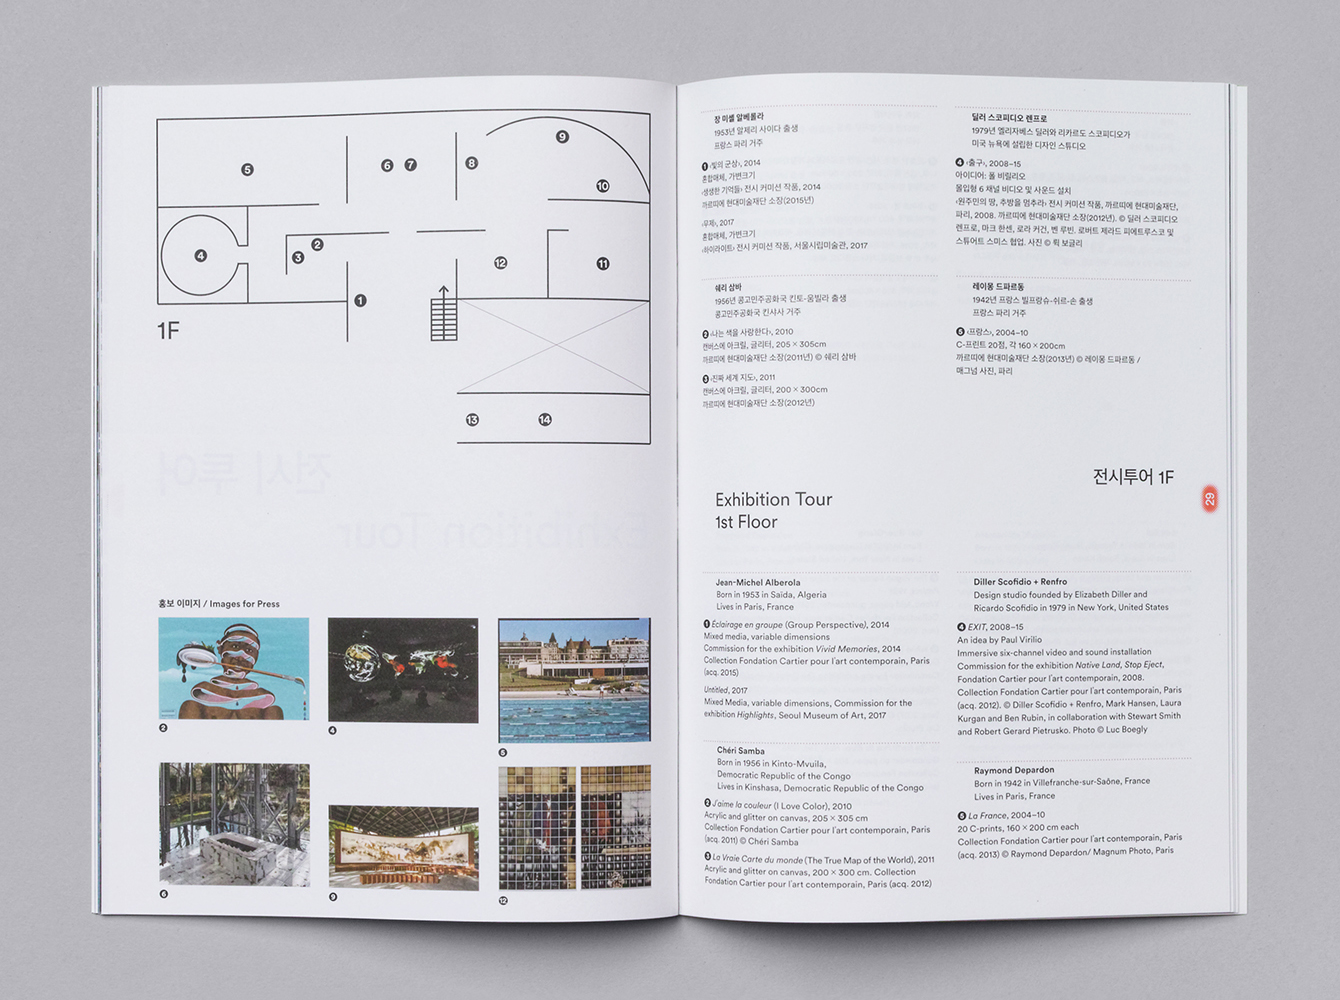 Visual identity and guide book by Studio fnt for South Korean art exhibition Highlights at SeMA